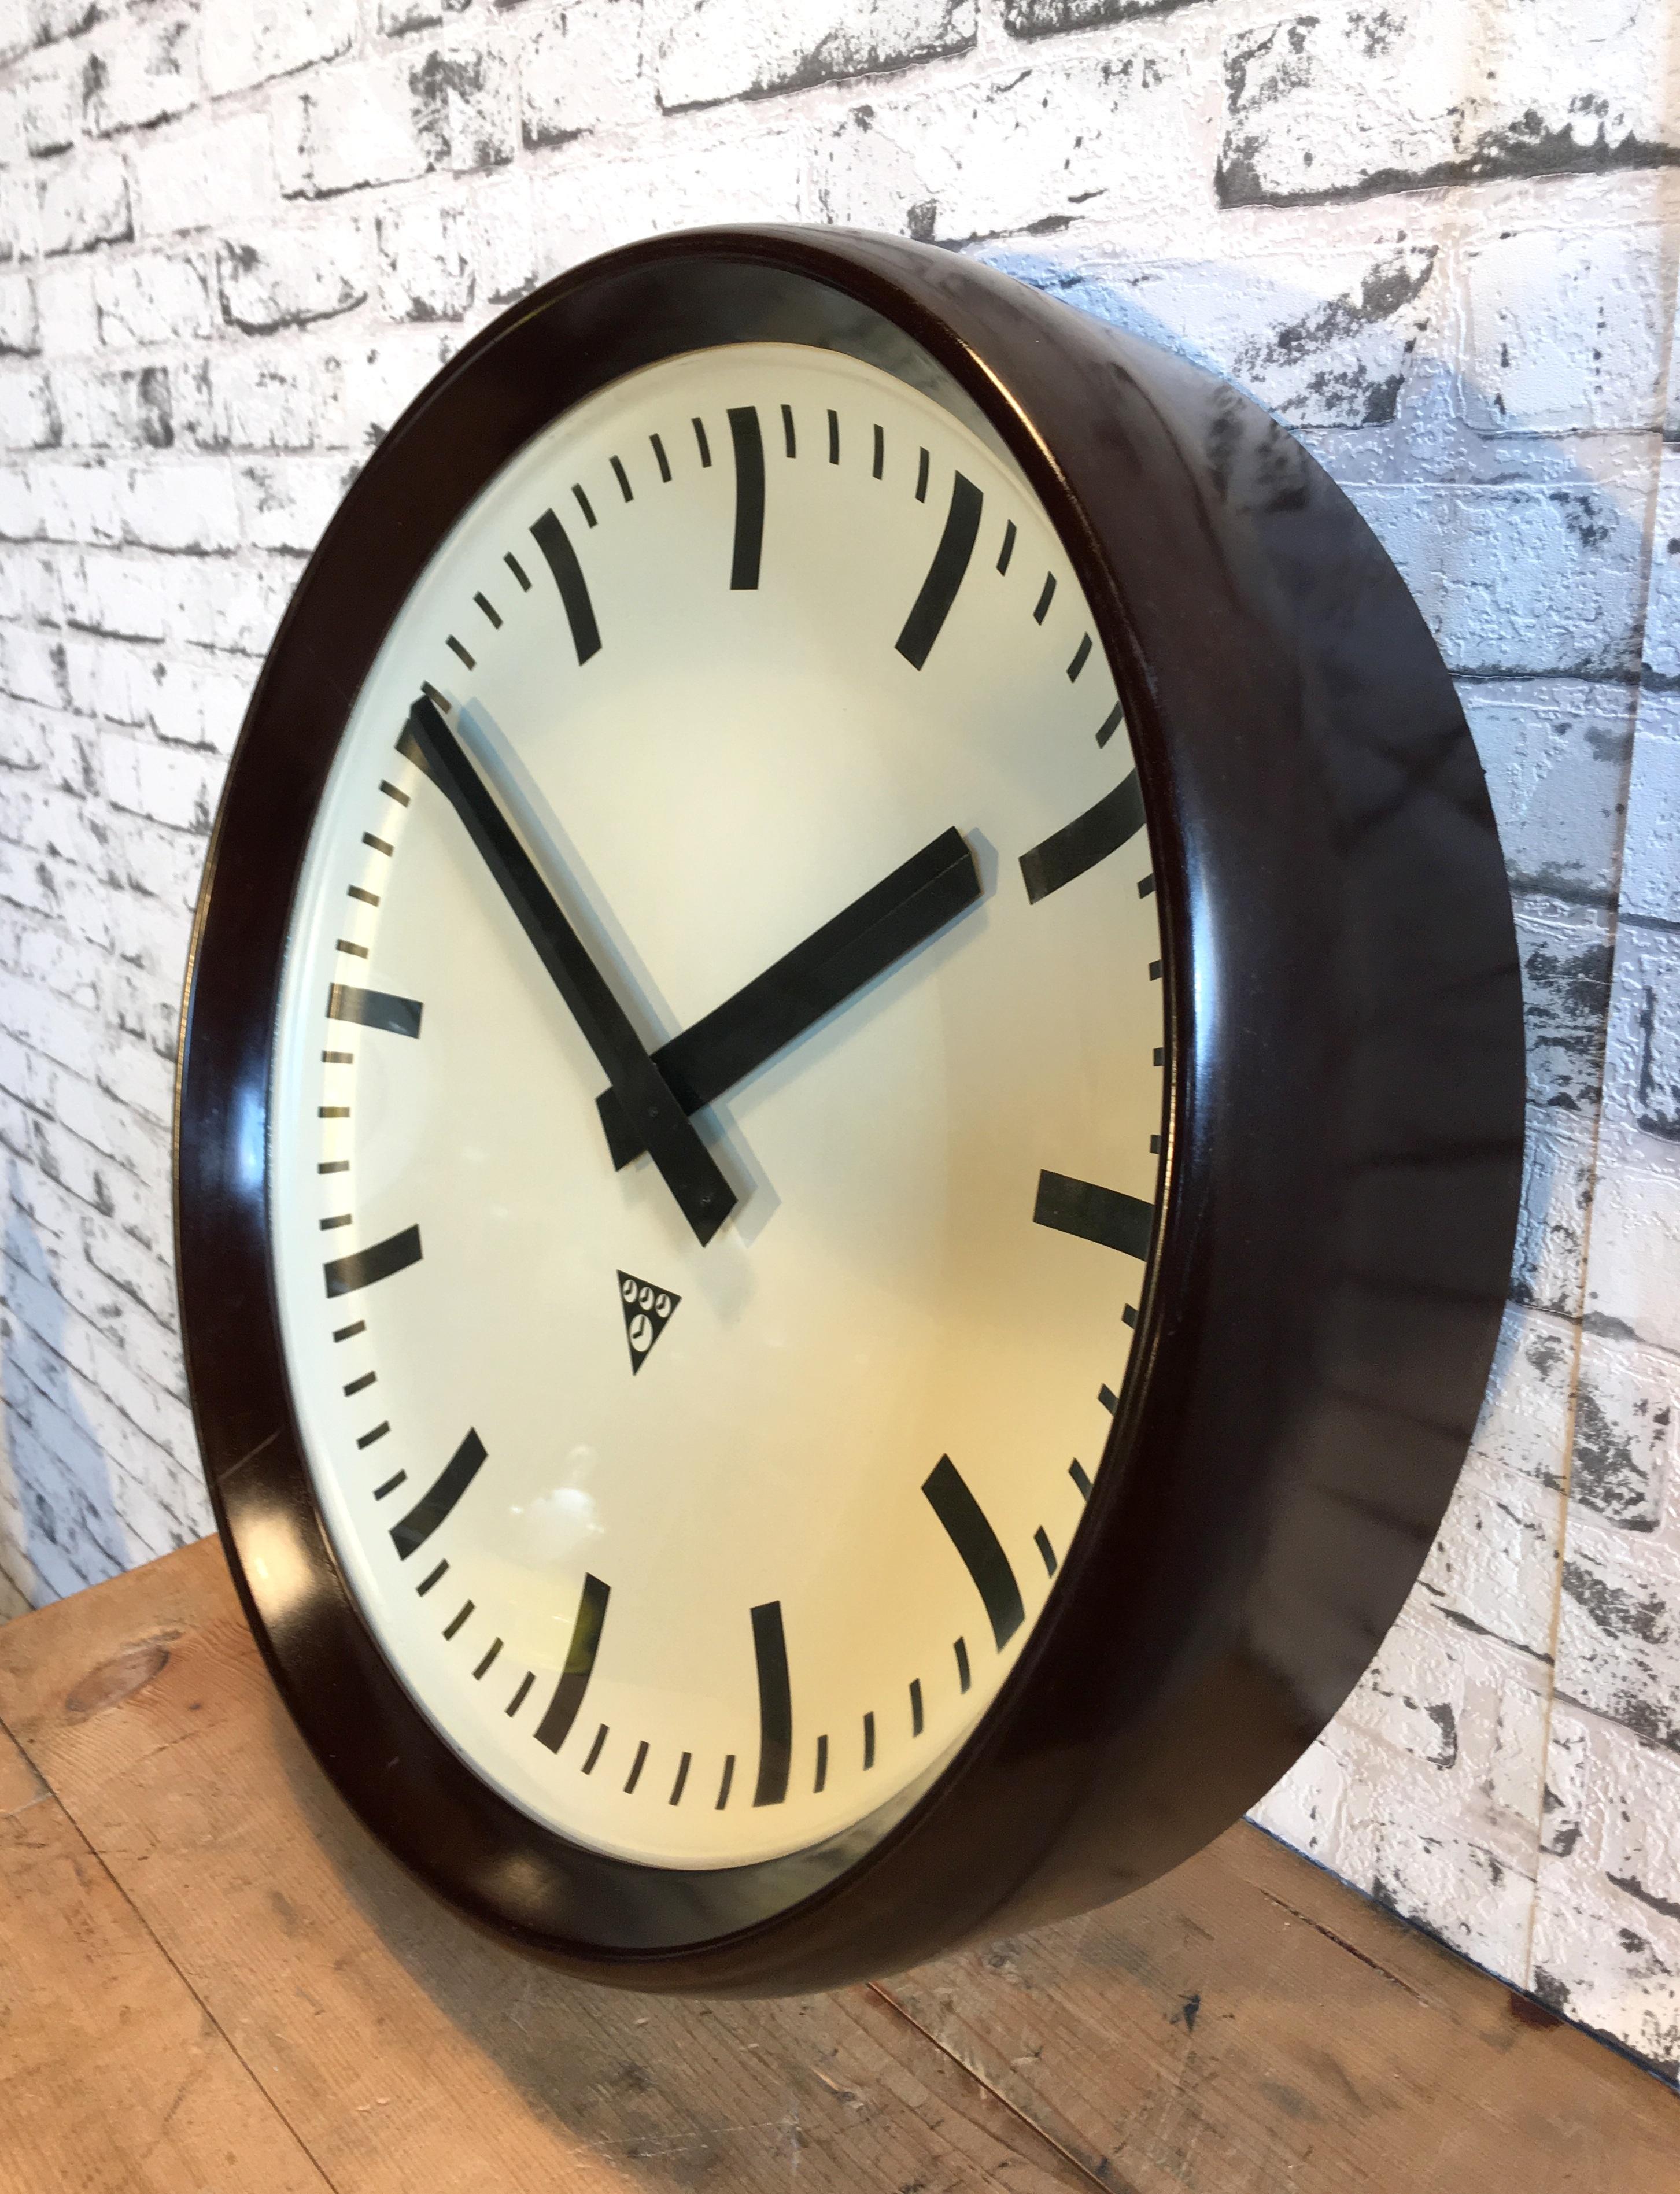 This large wall clock was produced by Pragotron in former Czechoslovakia during the 1960s.It features a brown bakelite frame and clear glass cover.The piece has been converted into a battery-powered clockwork and requires only one AA-battery.